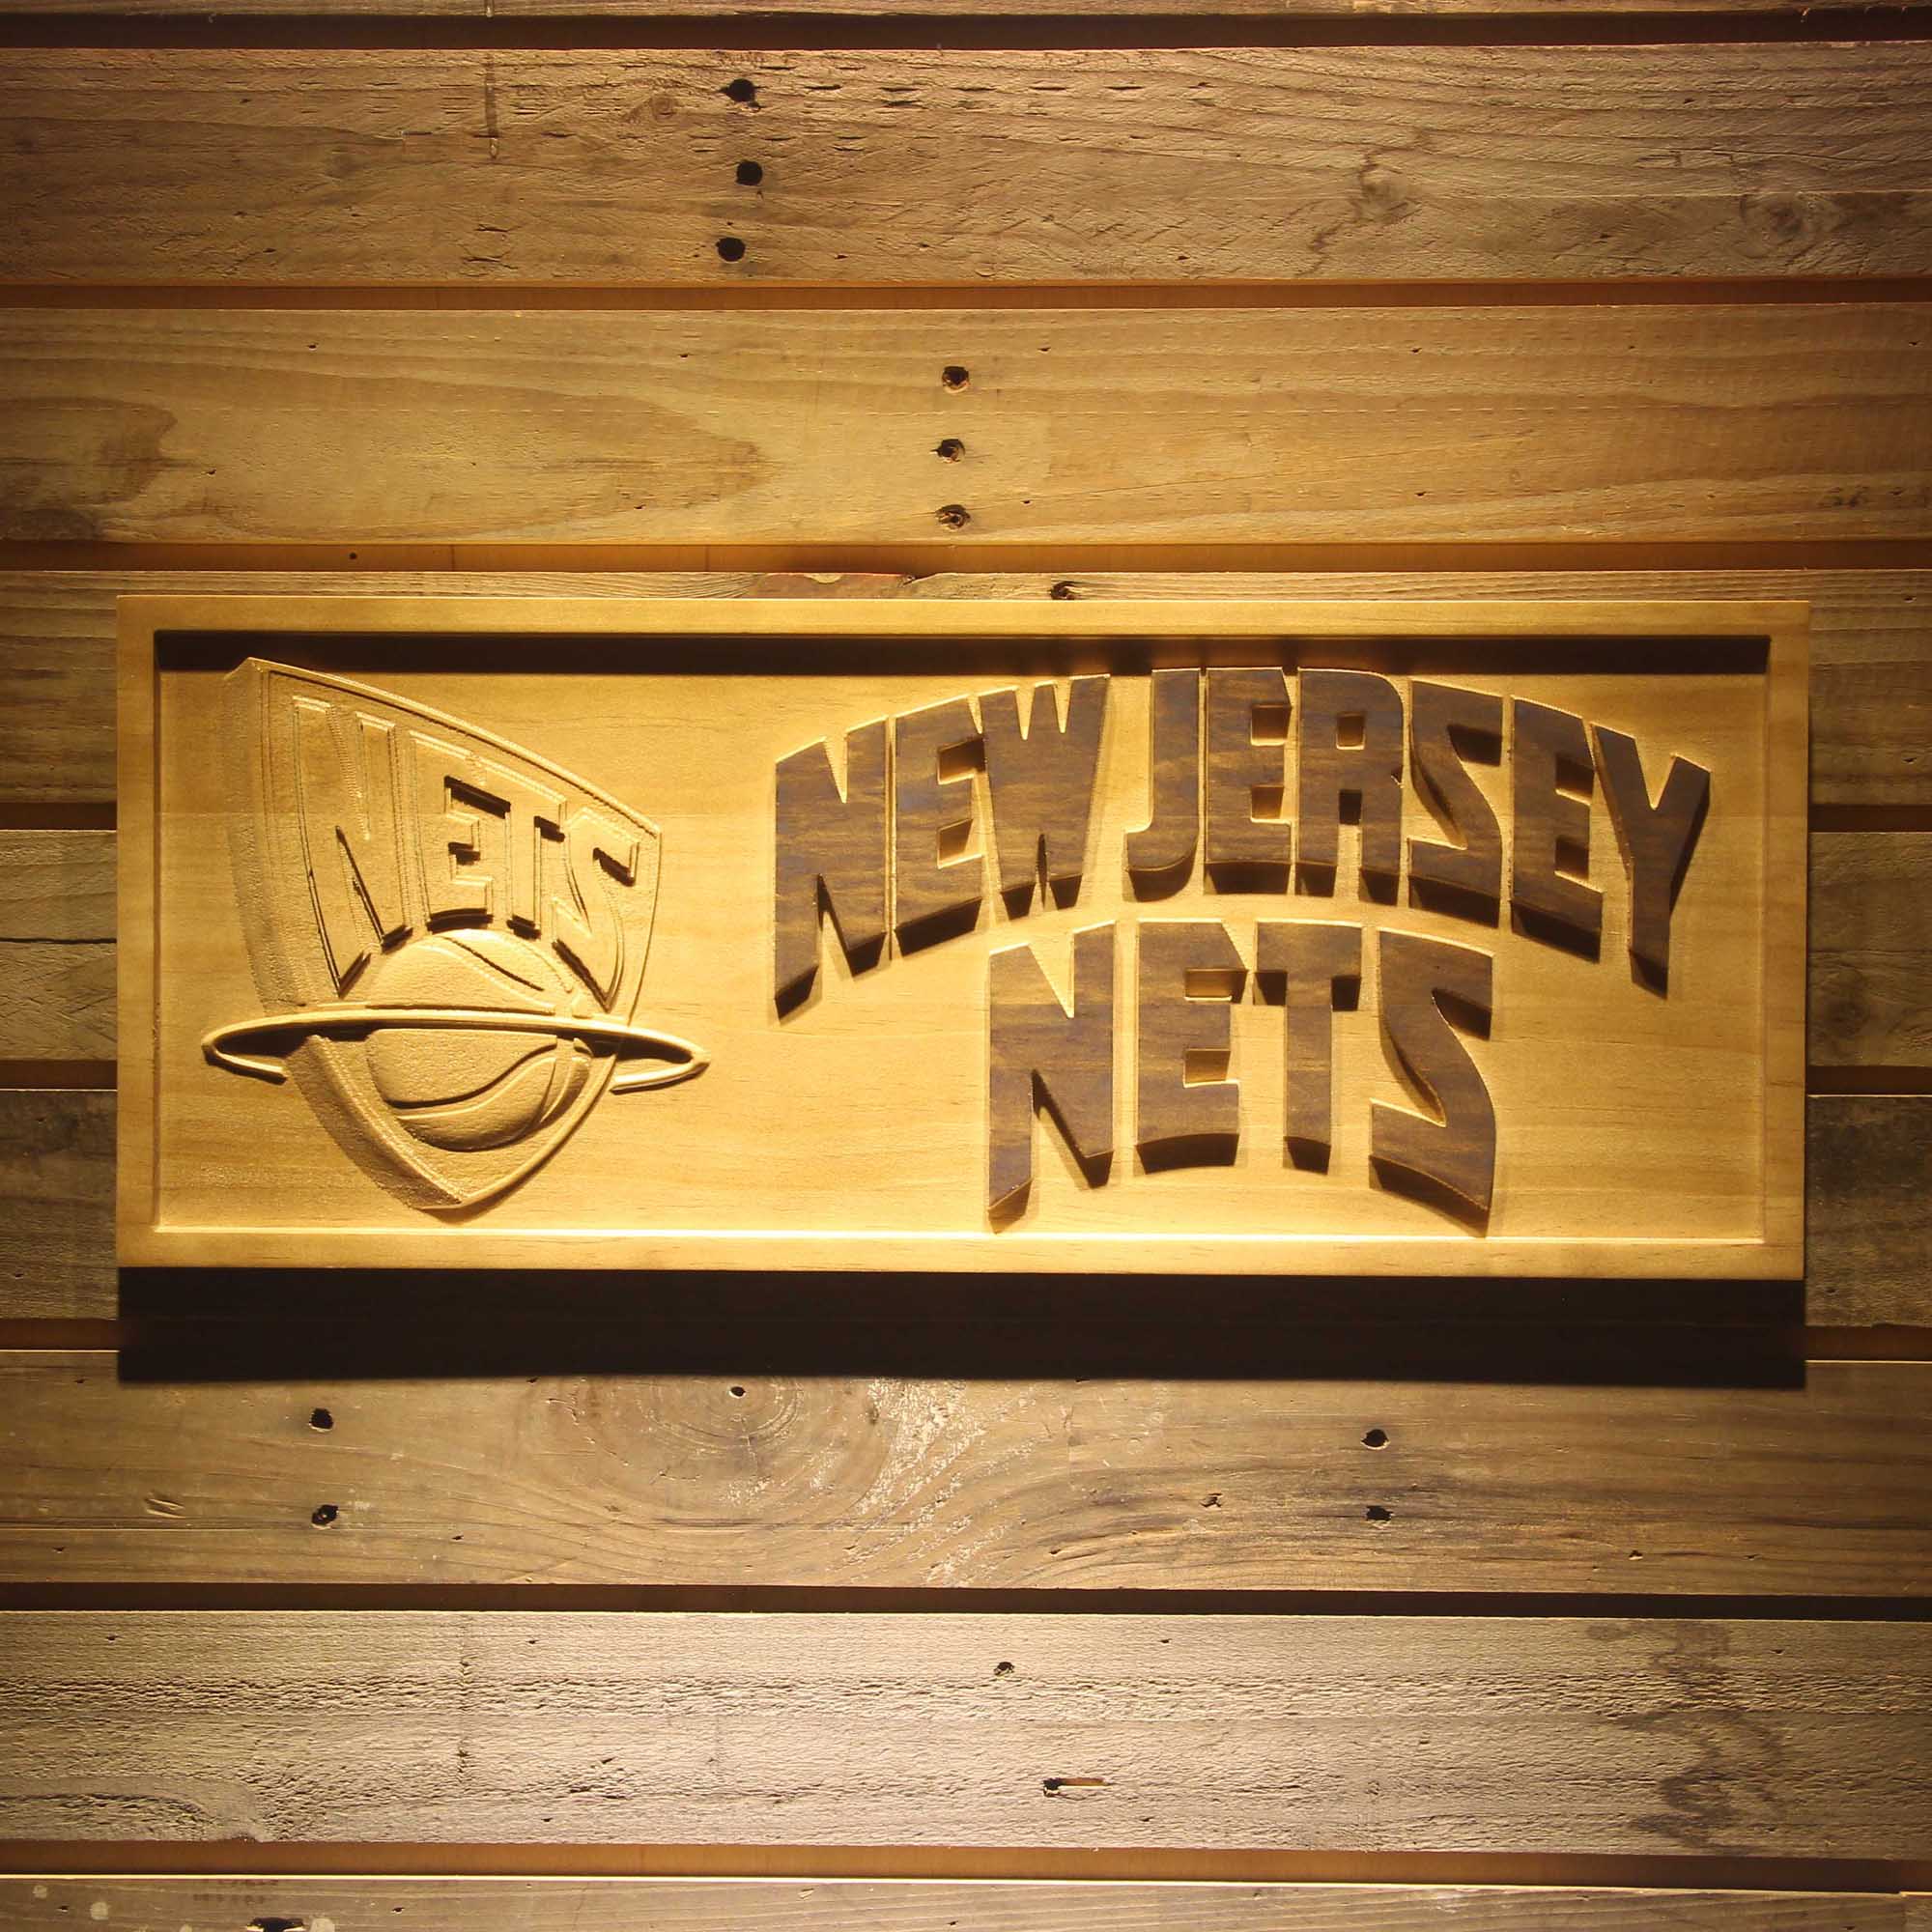 New Jersey Nets  3D Solid Wooden Craving Sign